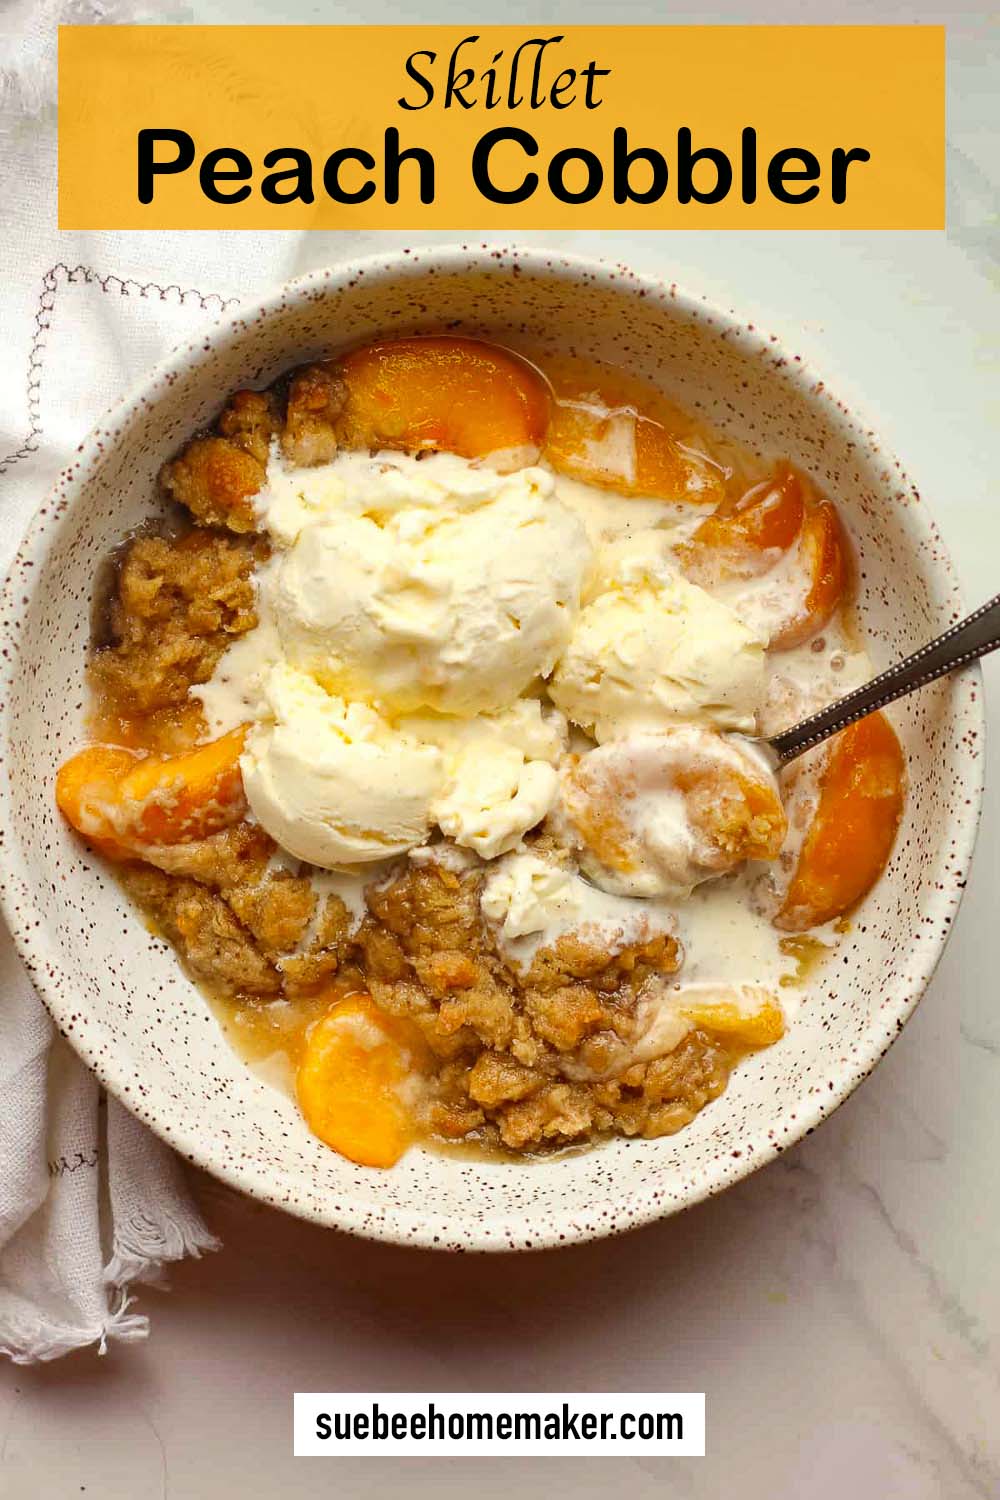 A bowl of skillet peach cobbler with scoops of vanilla ice cream.